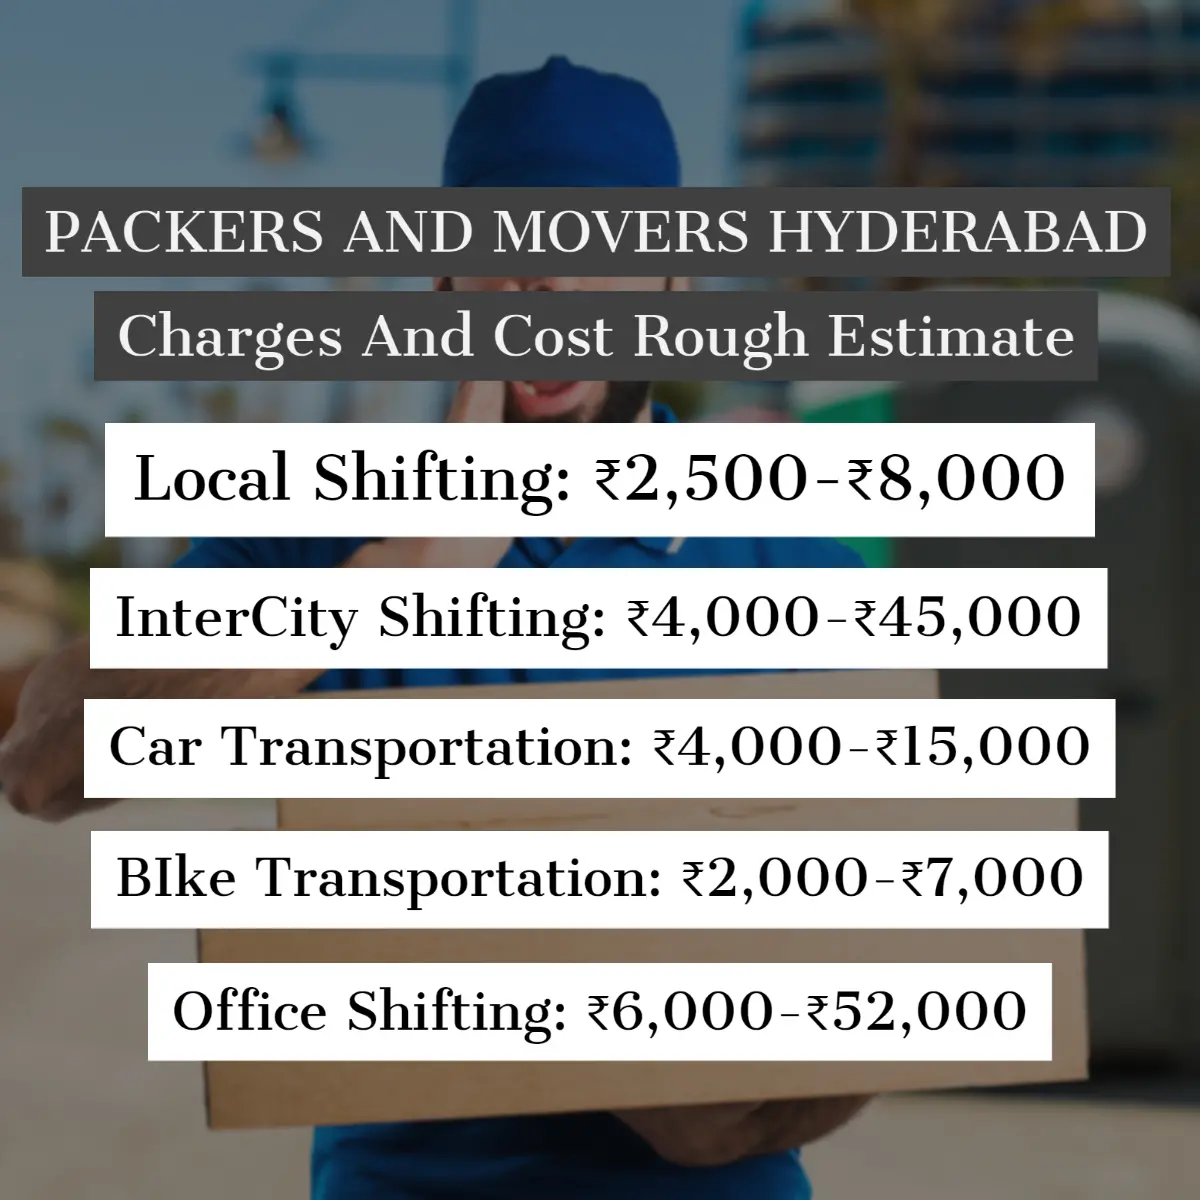 Packers and Movers Hyderabad Charges